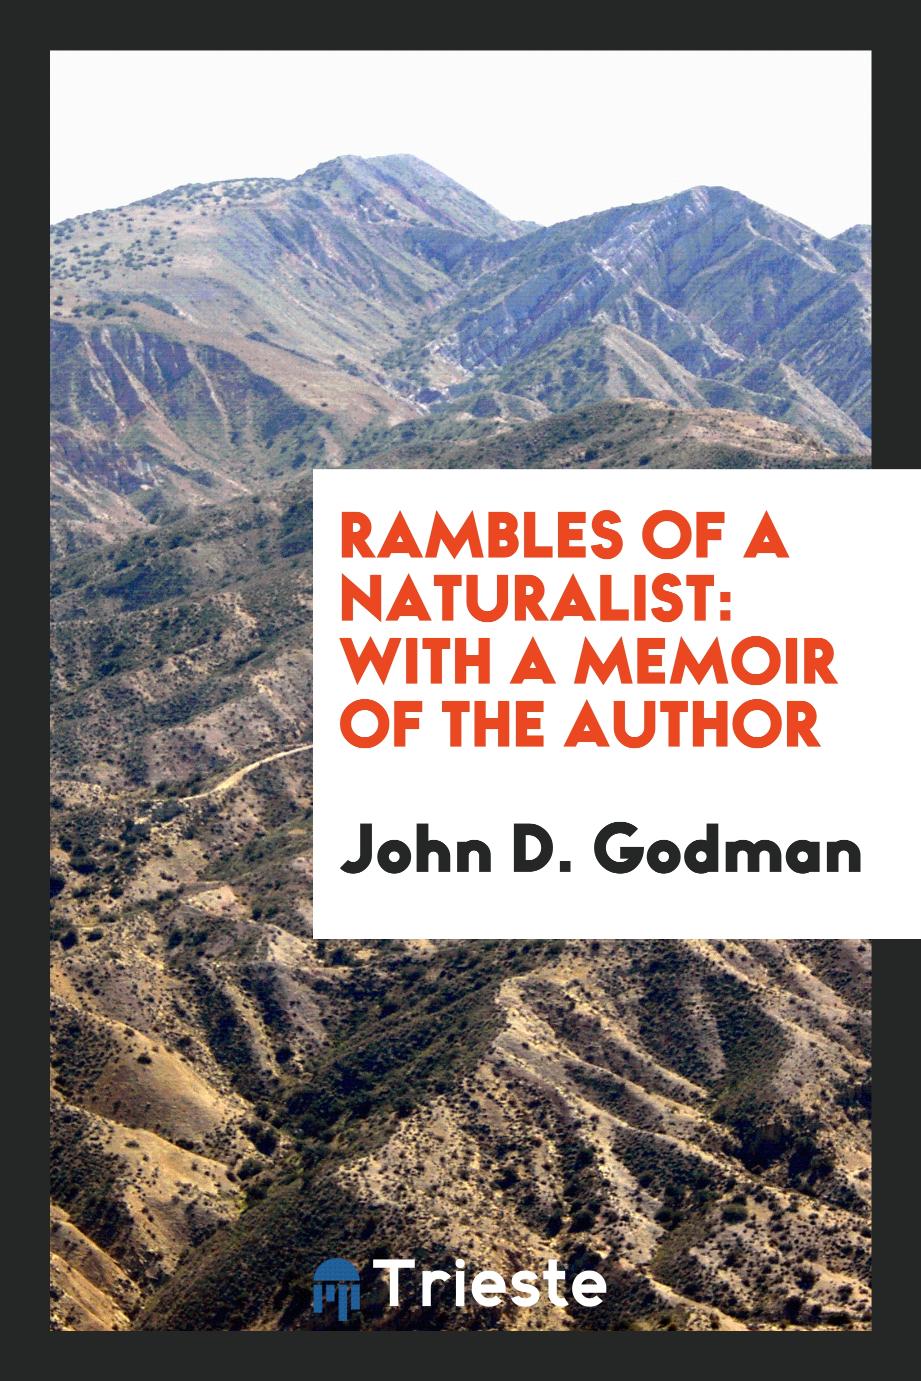 Rambles of a Naturalist: With a Memoir of the Author